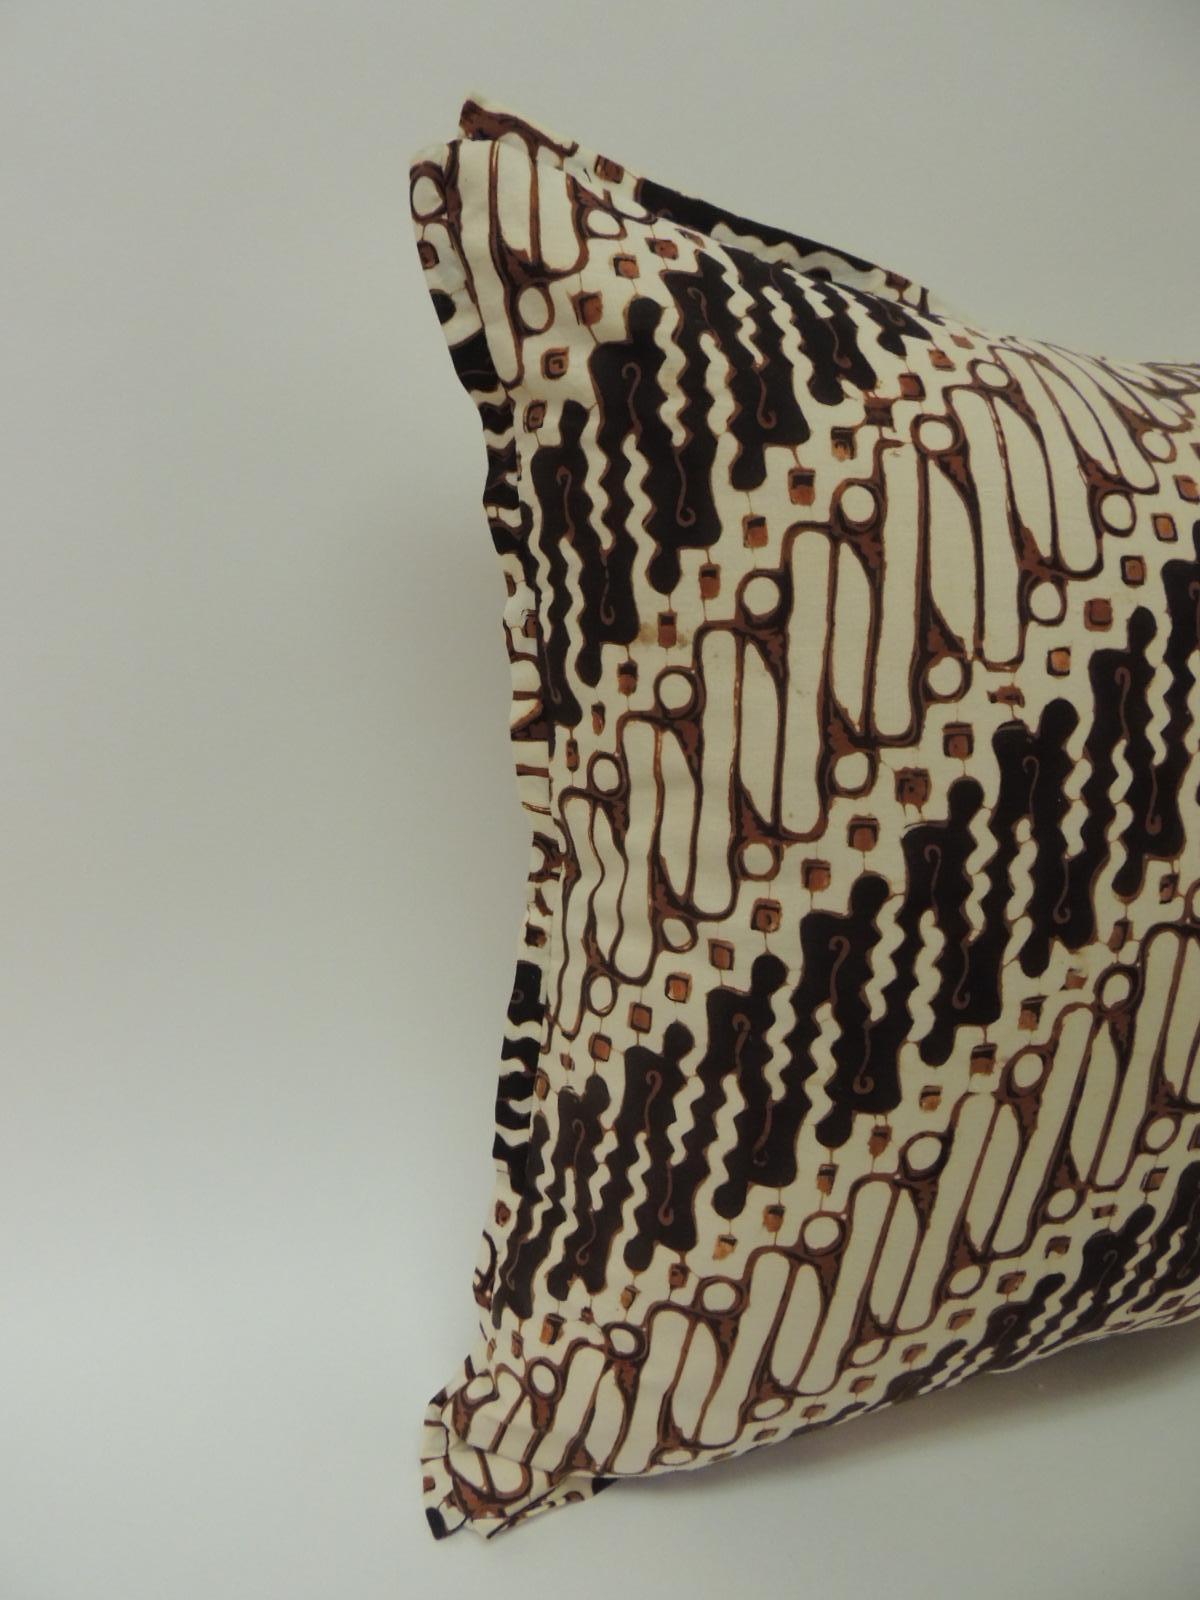 Vintage Beige, brown and black Batik decorative bolsters pillows handcrafted with 1970s vintage lumbar hand-blocked Batik artisanal textile panel with the traditional tribal design in shades of brown, black, natural and with a mocha color detail.